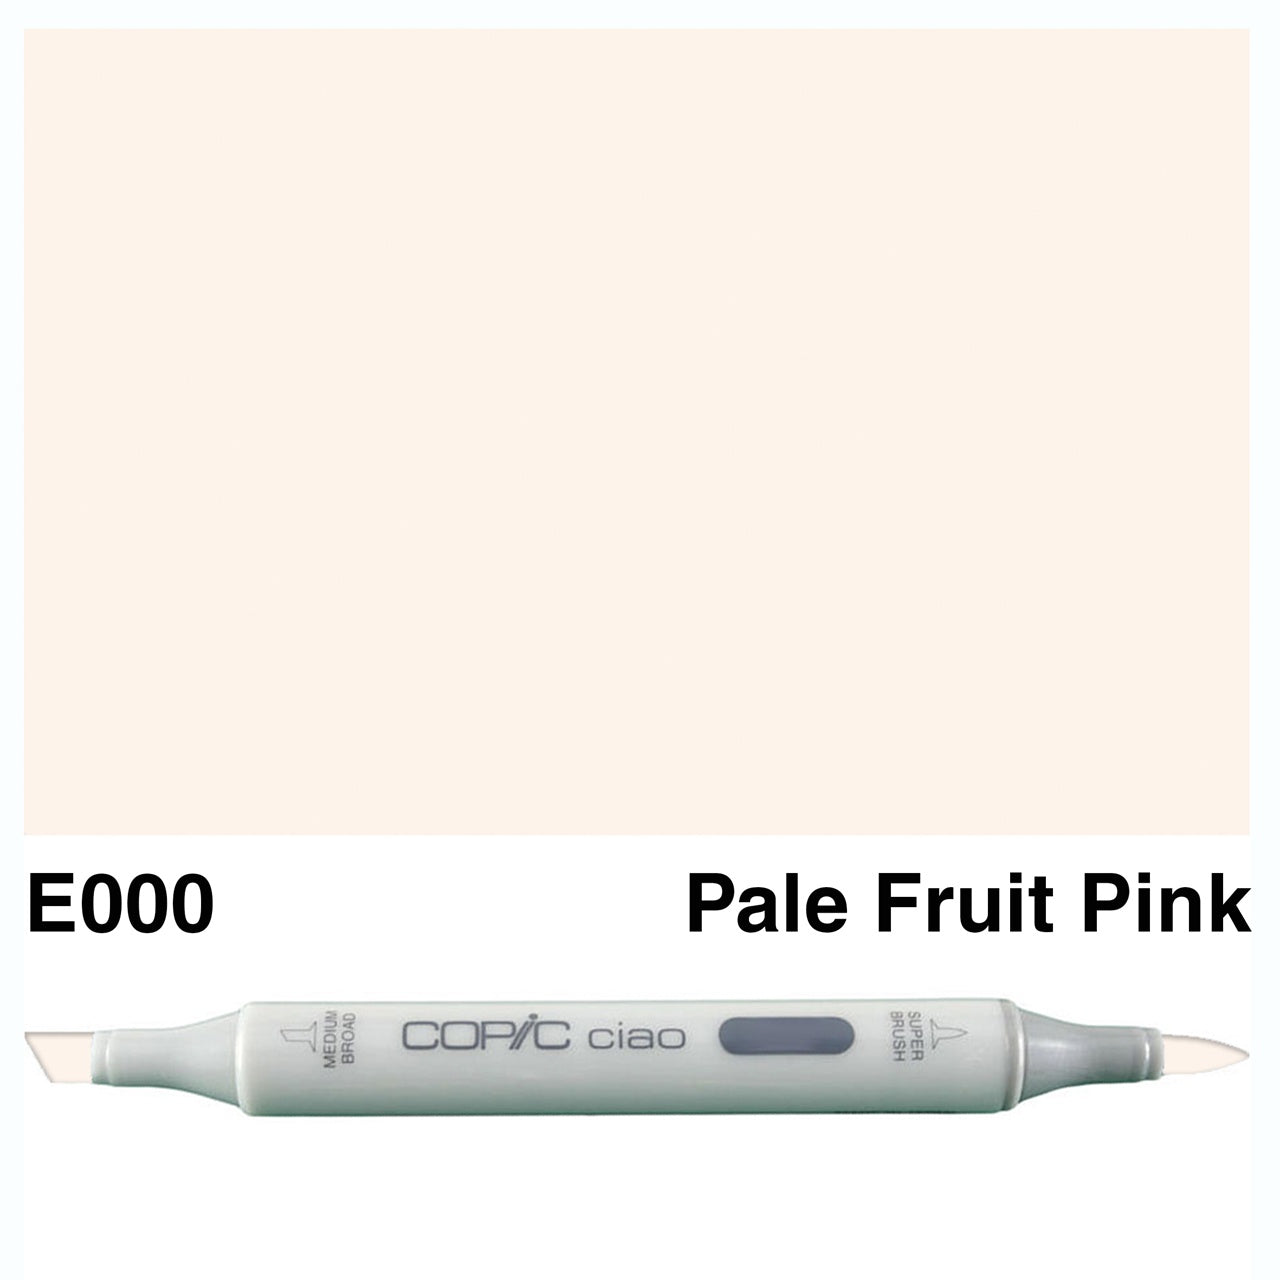 Copic Ciao Marker E000 - Pale Fruit Pink